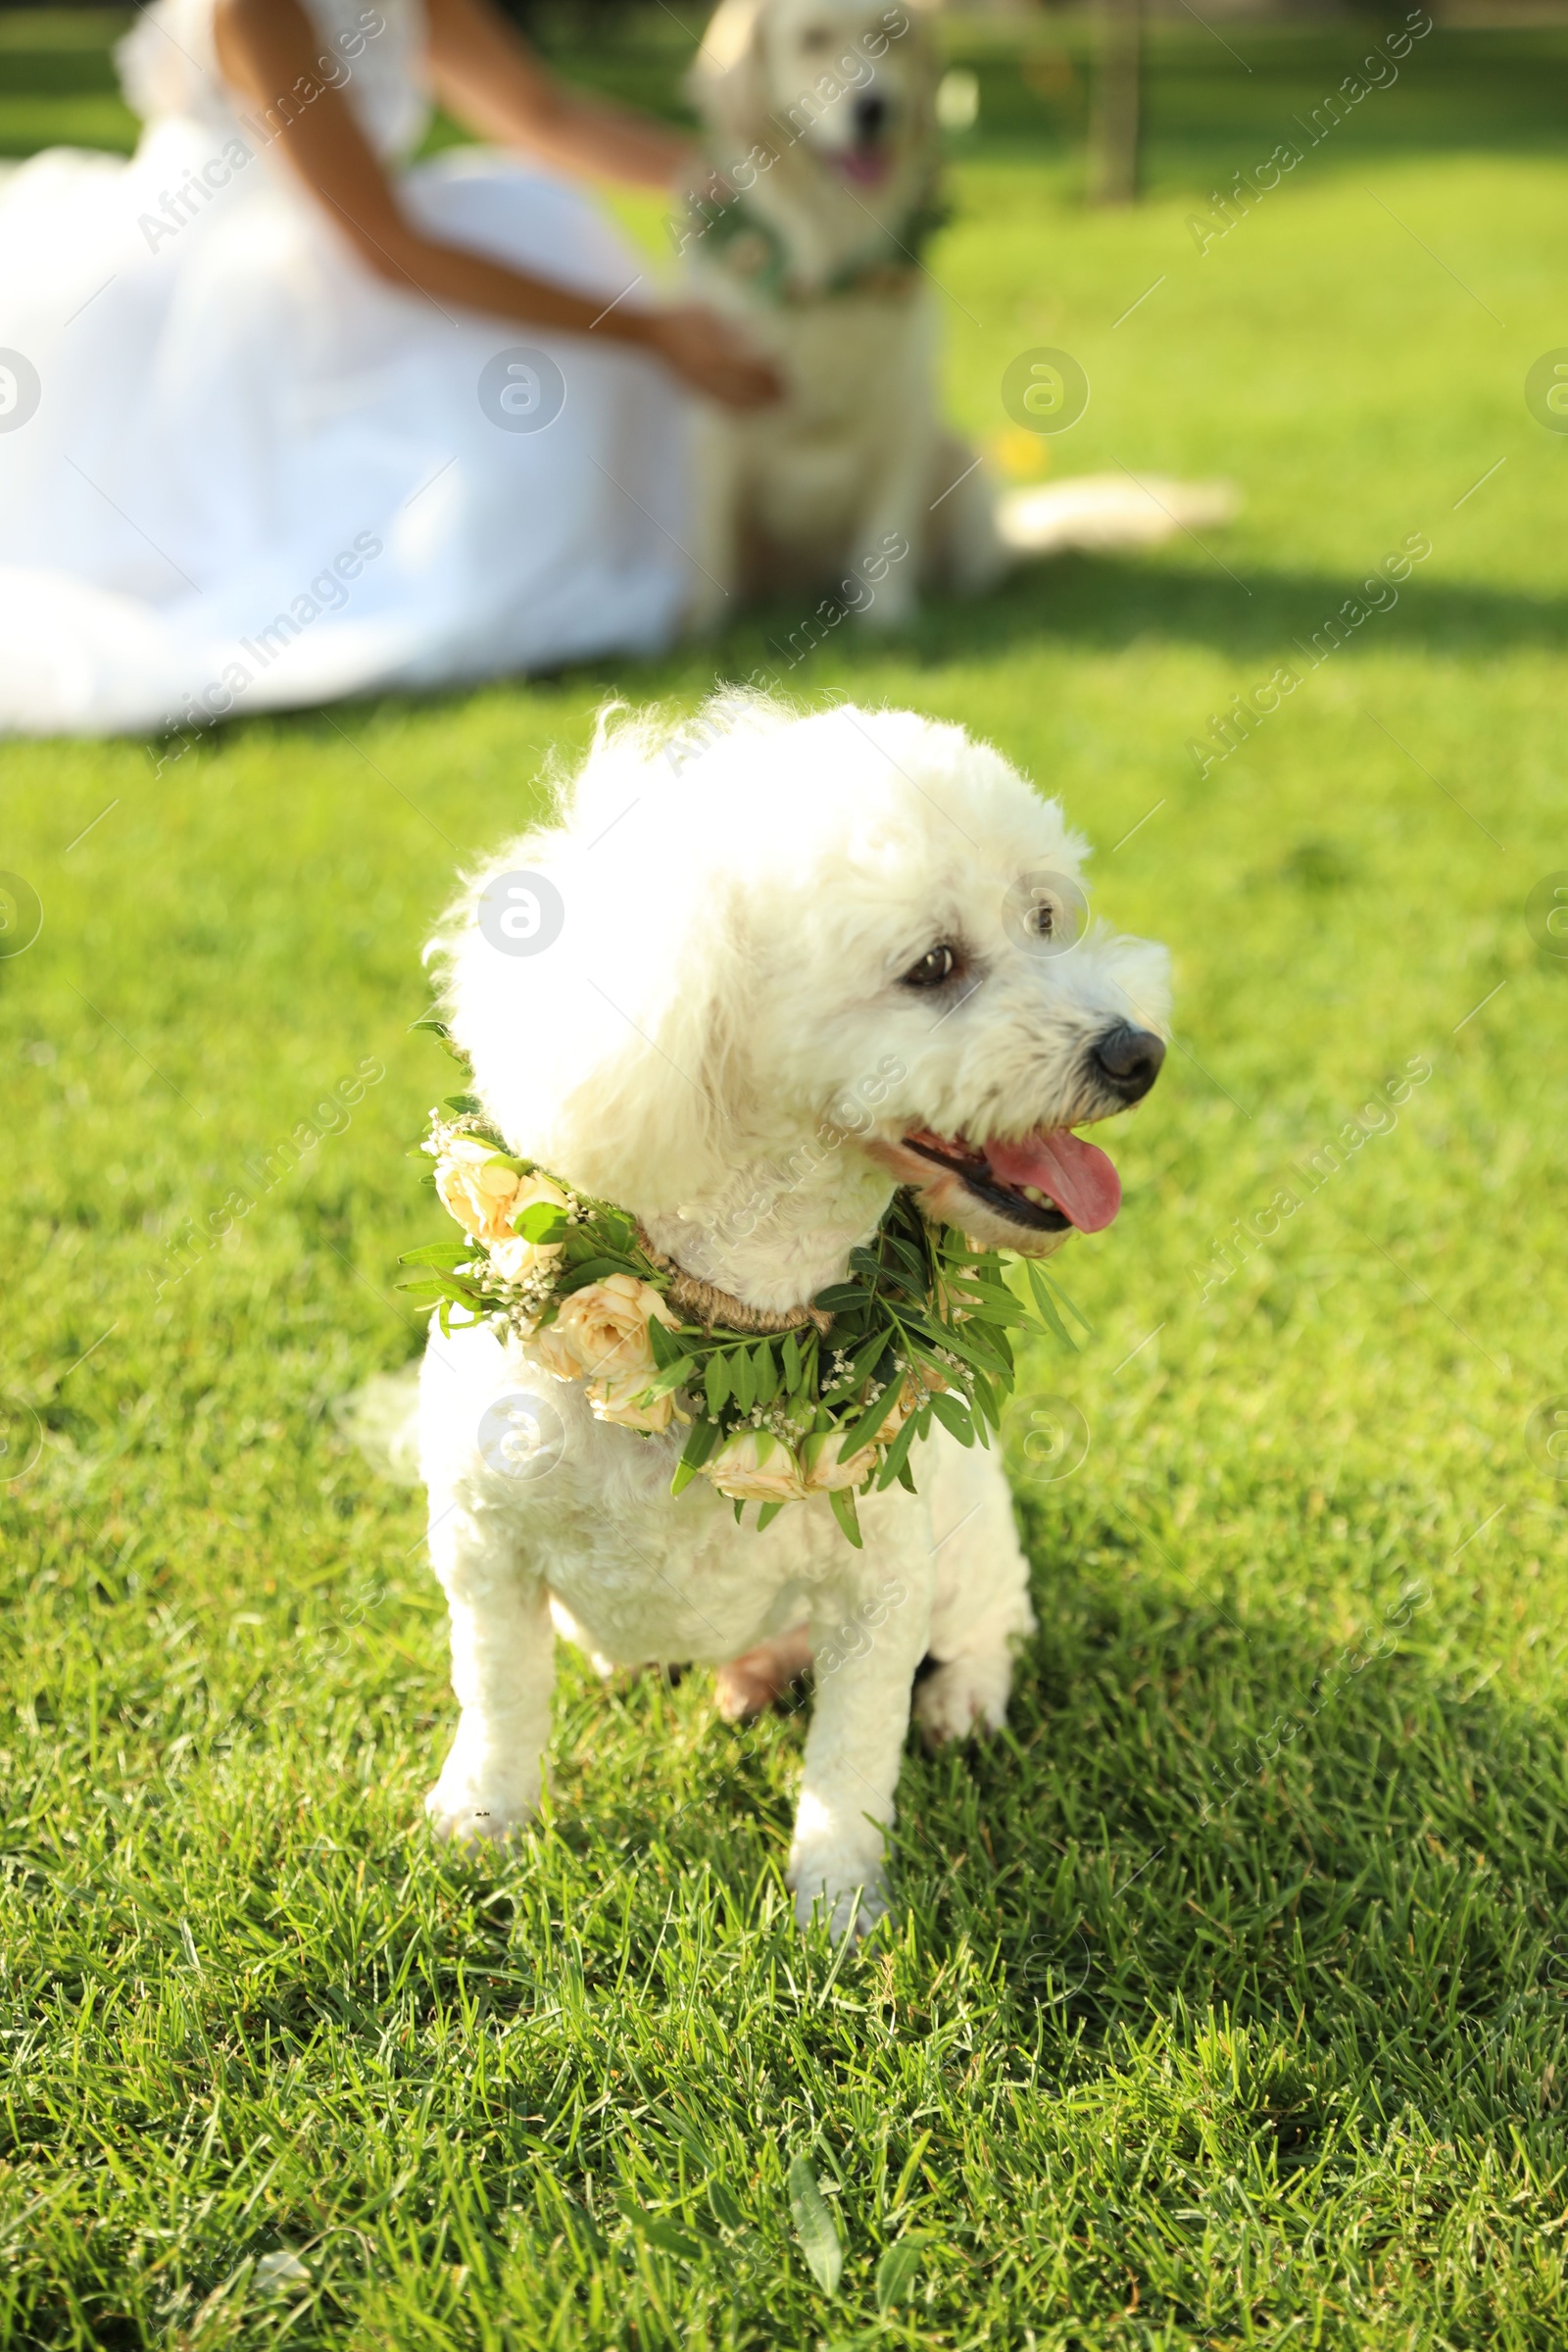 Photo of Adorable Bichon wearing wreath made of beautiful flowers on green grass outdoors